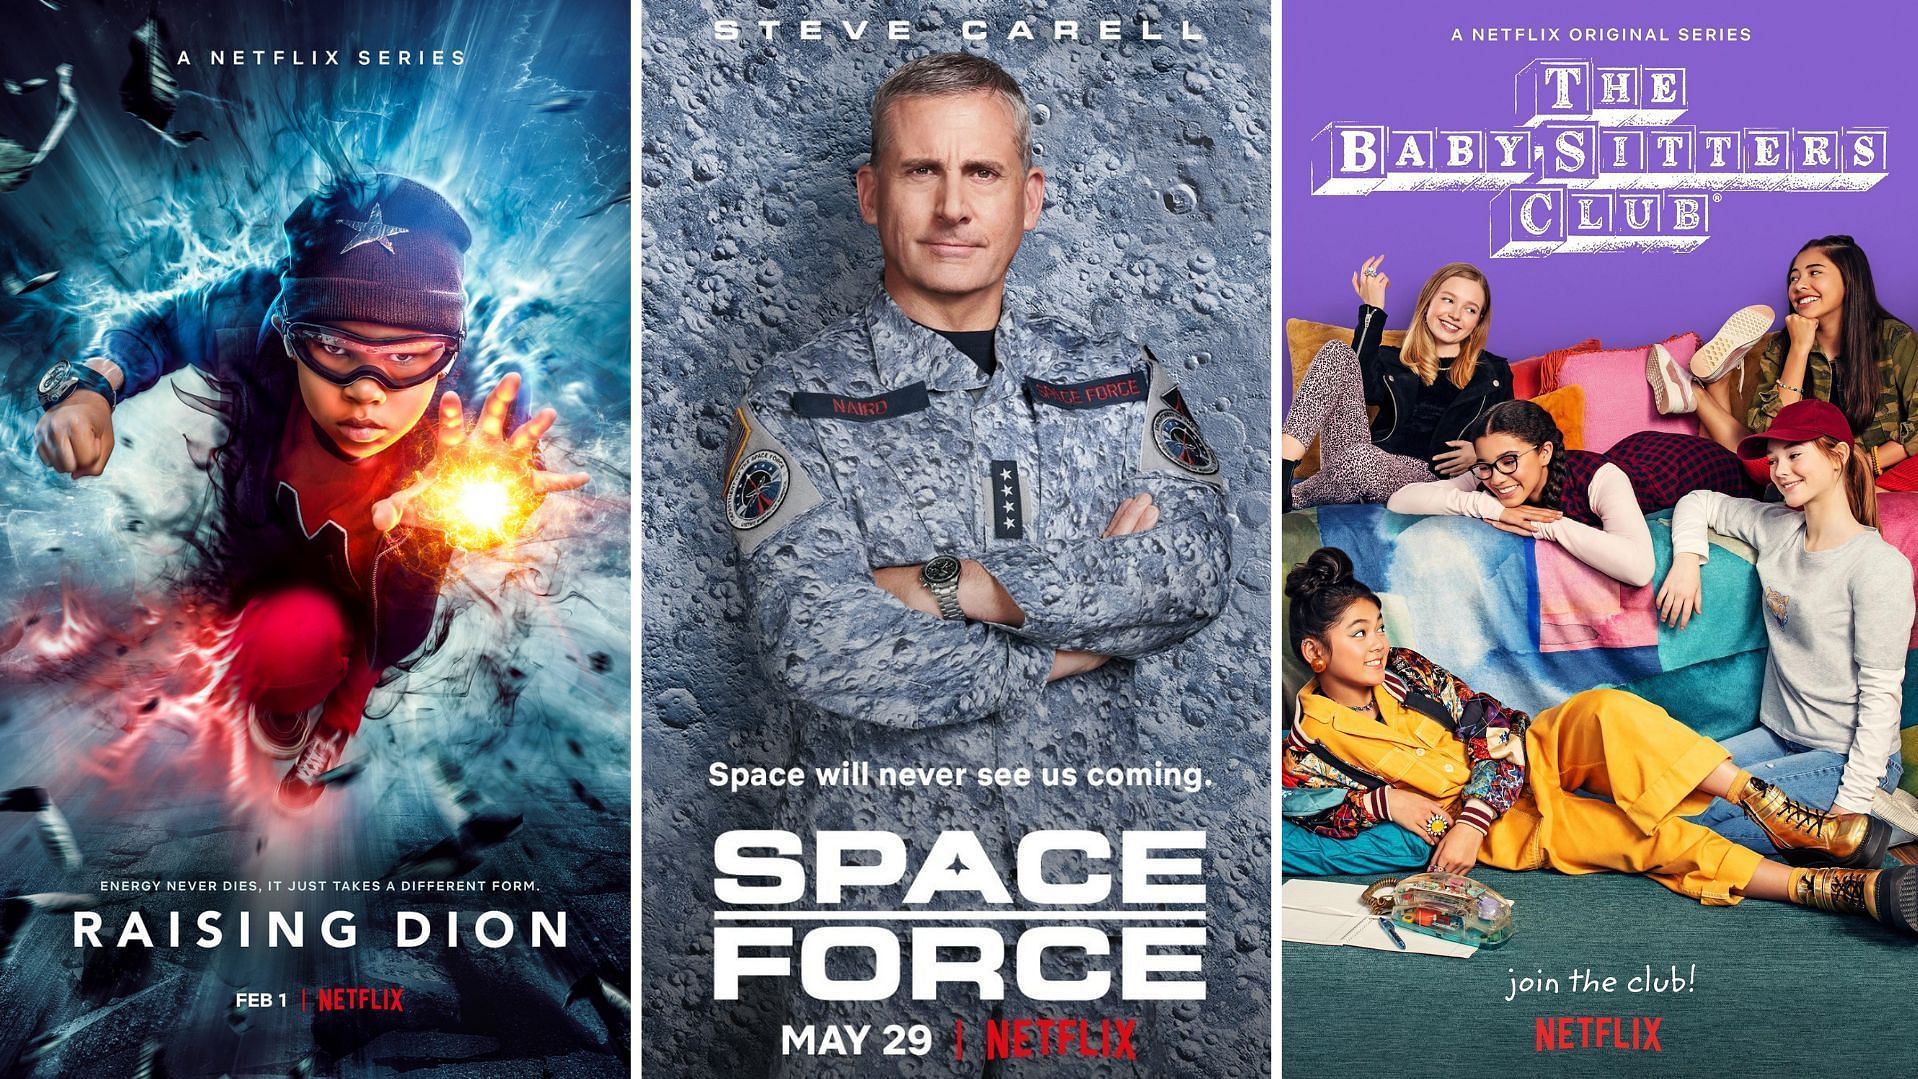 Raising Dion, Space Force and Baby Sitters Club posters (Images via Netflix)